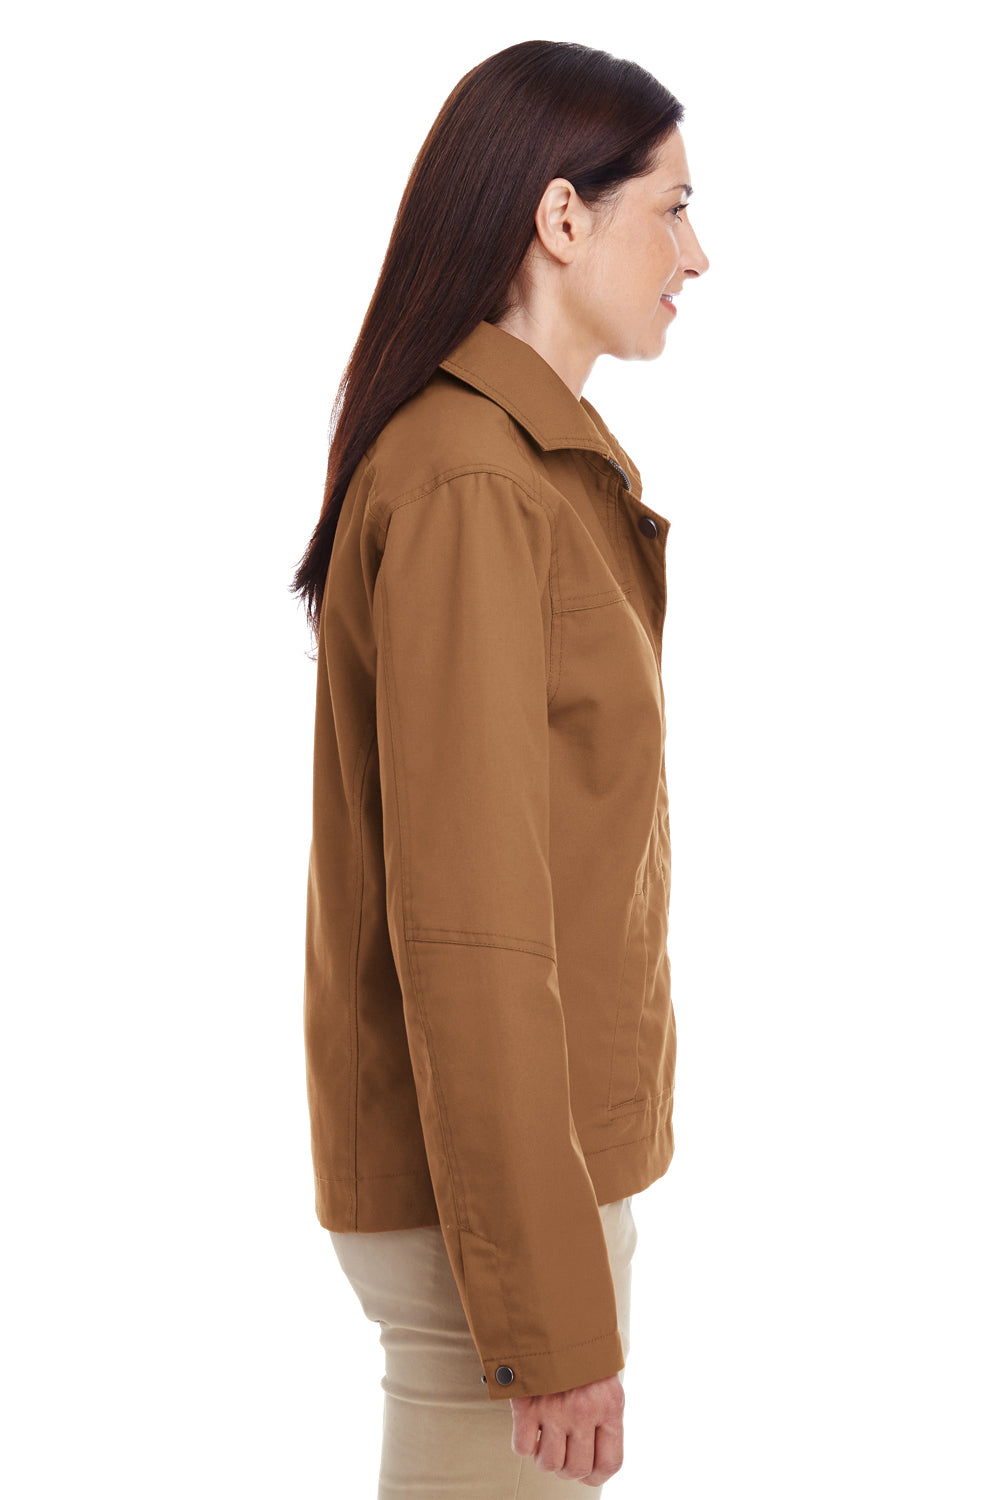 Harriton M705W Womens Auxiliary Water Resistant Canvas Full Zip Jacket Duck Brown Side